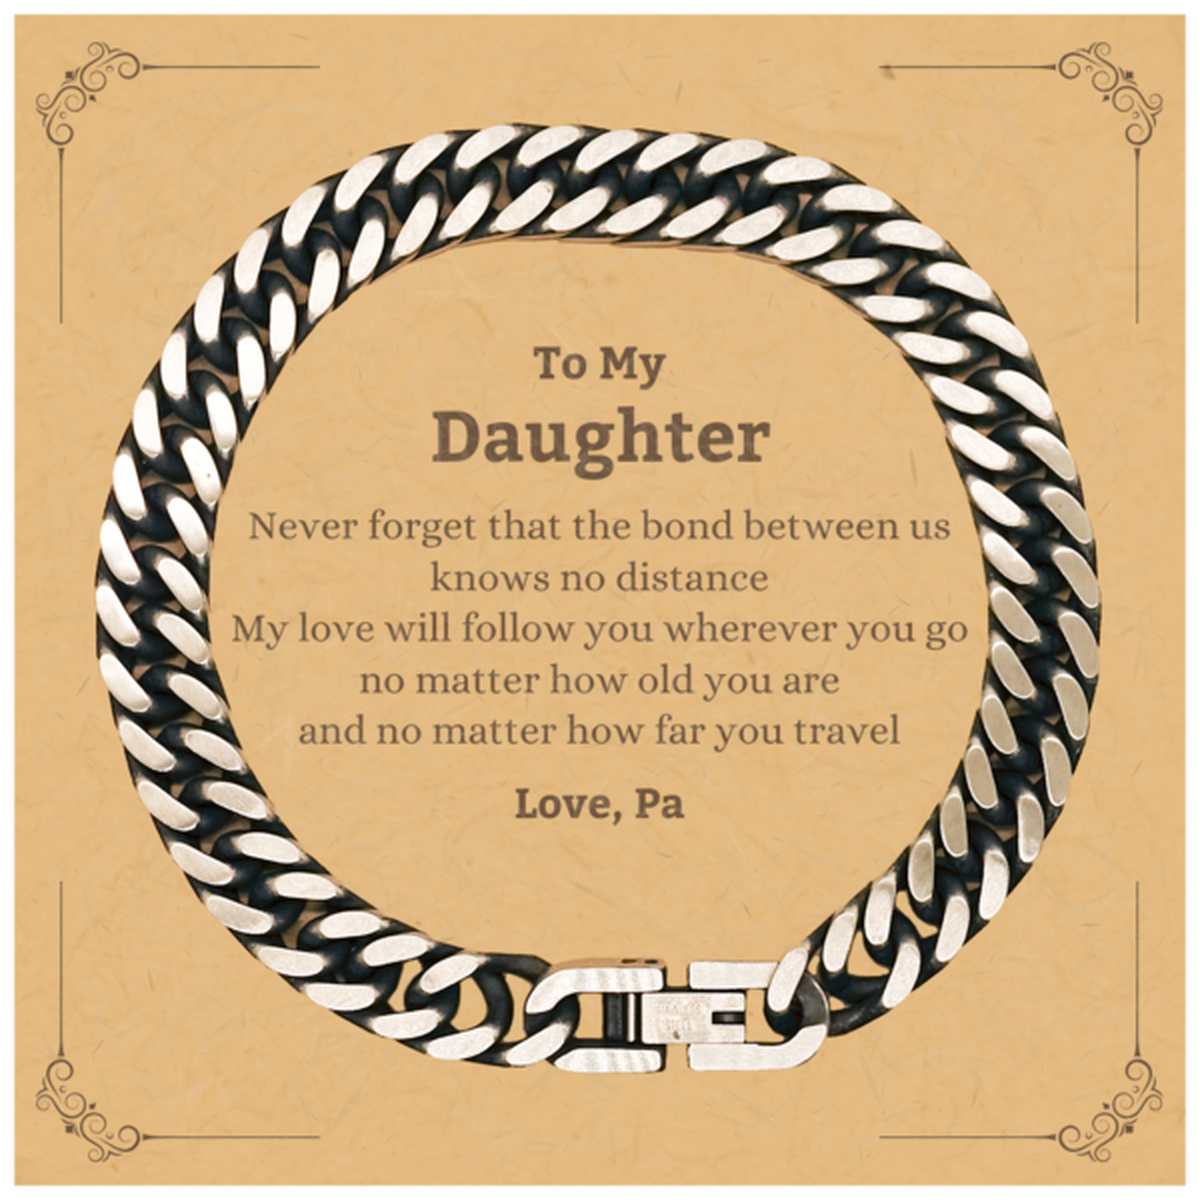 Daughter Birthday Gifts from Pa, Adjustable Cuban Link Chain Bracelet for Daughter Christmas Graduation Unique Gifts Daughter Never forget that the bond between us knows no distance. Love, Pa